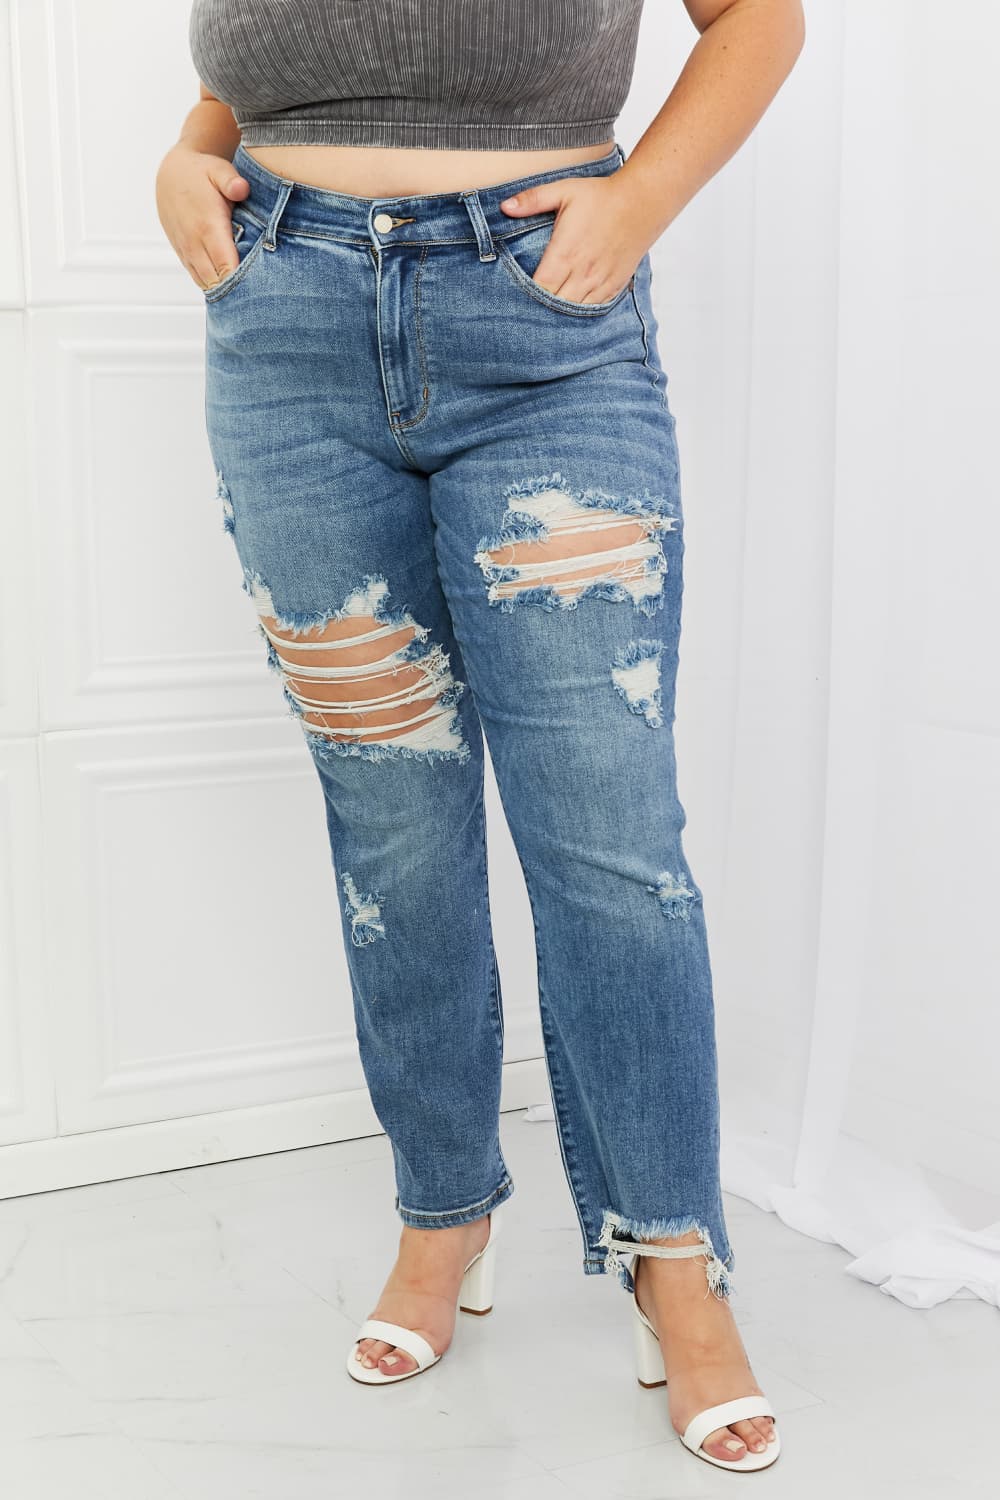 Plus Size, Judy Blue, Mid-Rise Heavy Destroy Straight Jeans